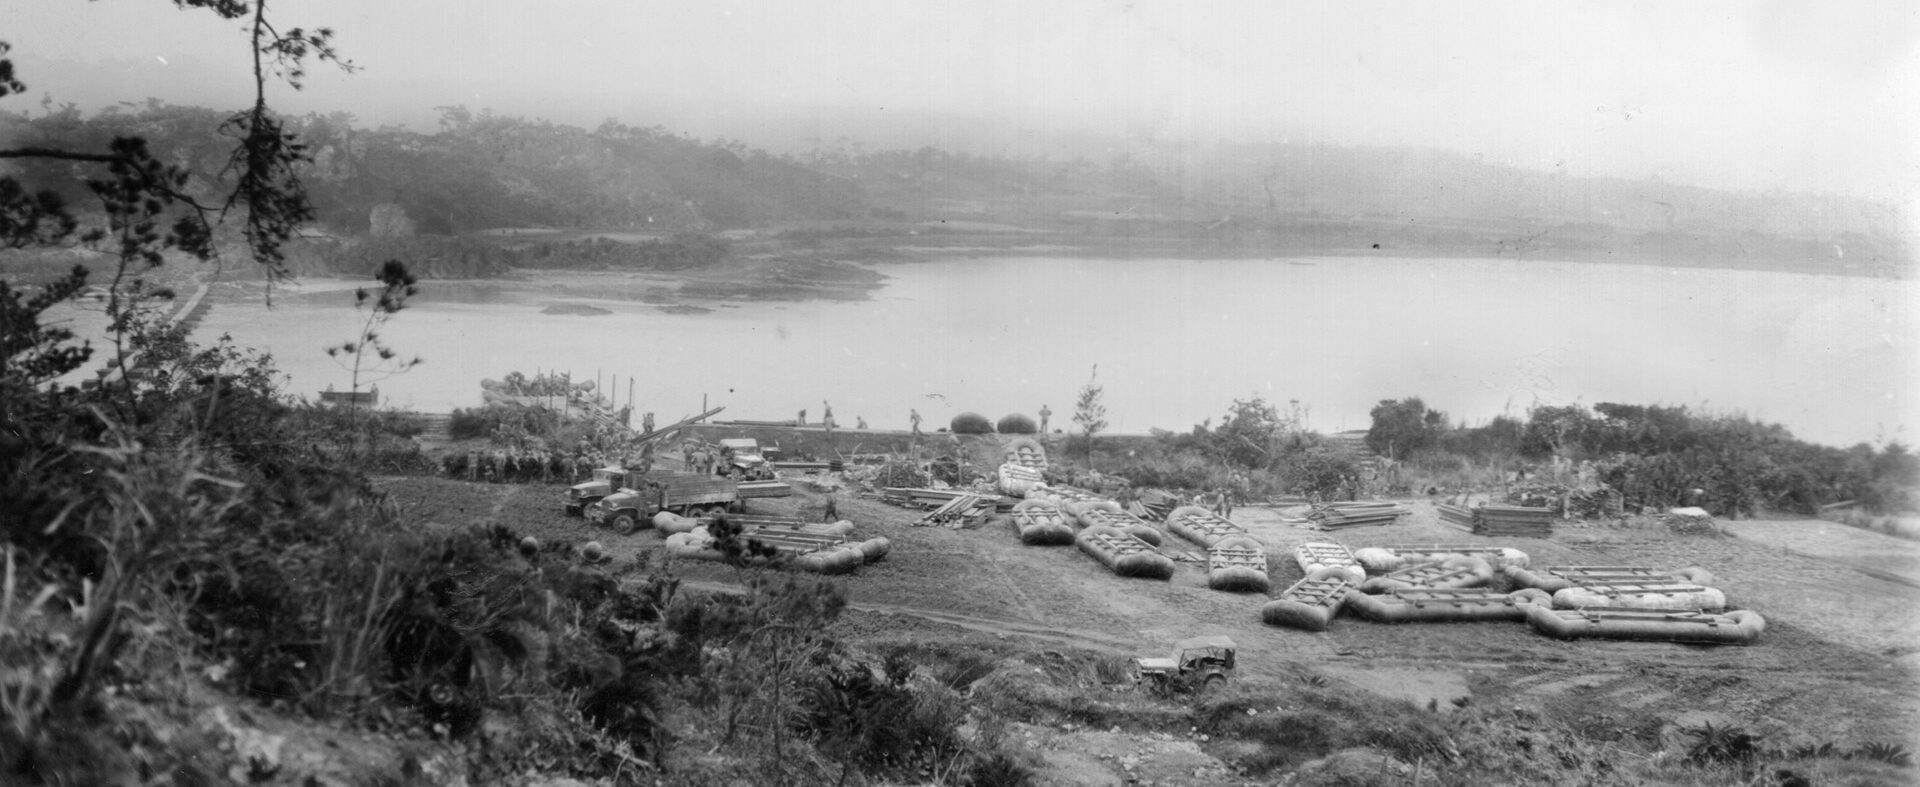 Men of the 102nd Engineer Battalion prepare to build the pontoon bridge that the 27th Infantry Division will use to get tanks and supplies across the Machinato Inlet to attack Kakazu Ridge. 